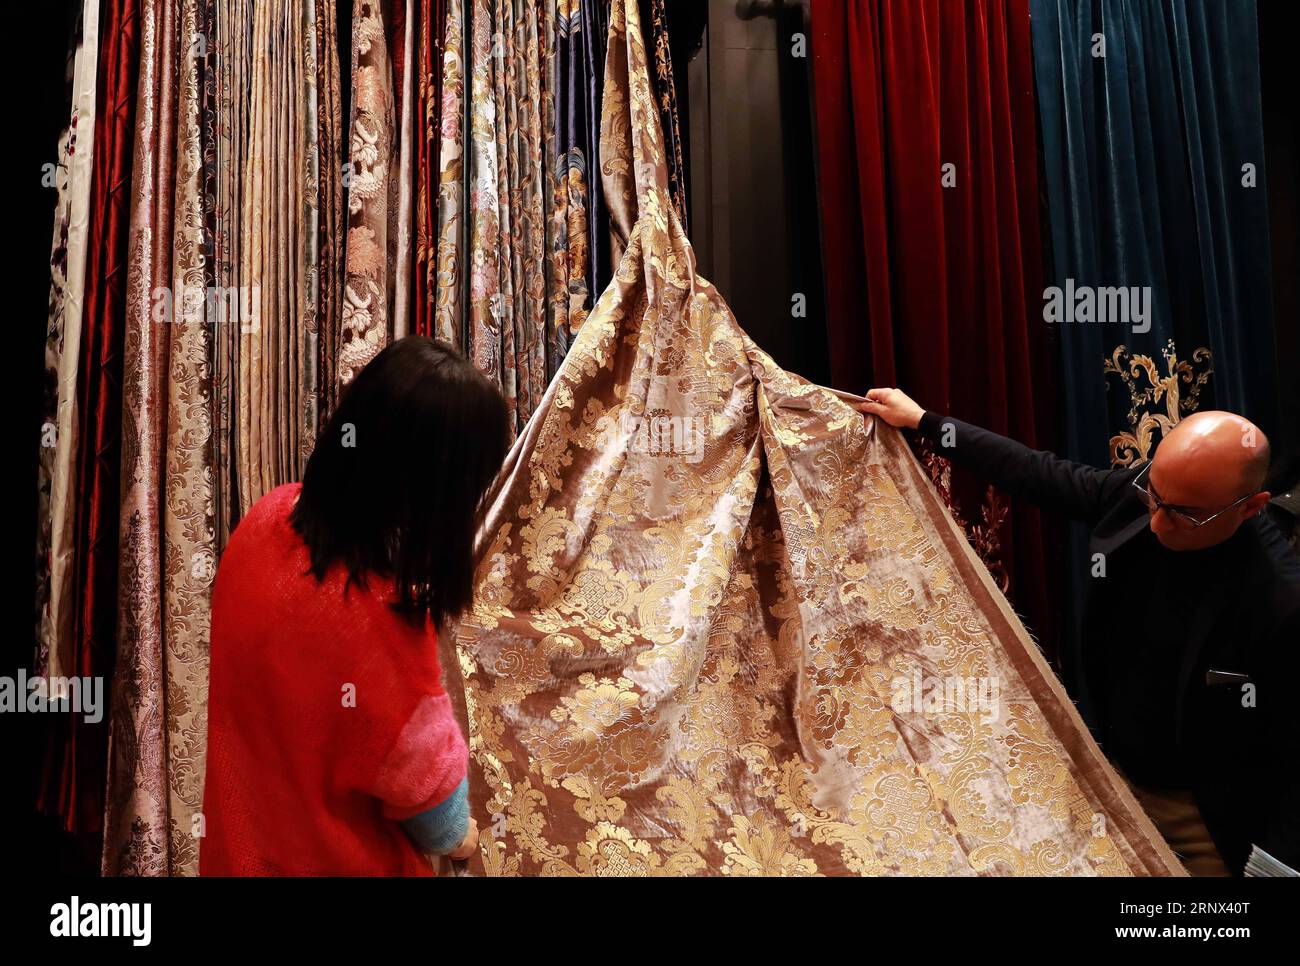 (180112) -- FRANKFURT, Jan. 12, 2018 -- A Chinese exhibitor talks with a visitor at a Chinese textile booth at Heimtextil, the world s largest international trade fair for home and contract textiles, in Frankfurt, Germany, on Jan. 11, 2018. A total of 2,975 exhibitors from 64 countries and regions attended the trade fair this year, 545 of which are from China. ) (djj) GERMANY-FRANKFURT-HEIMTEXTIL-CHINA LuoxHuanhuan PUBLICATIONxNOTxINxCHN Stock Photo